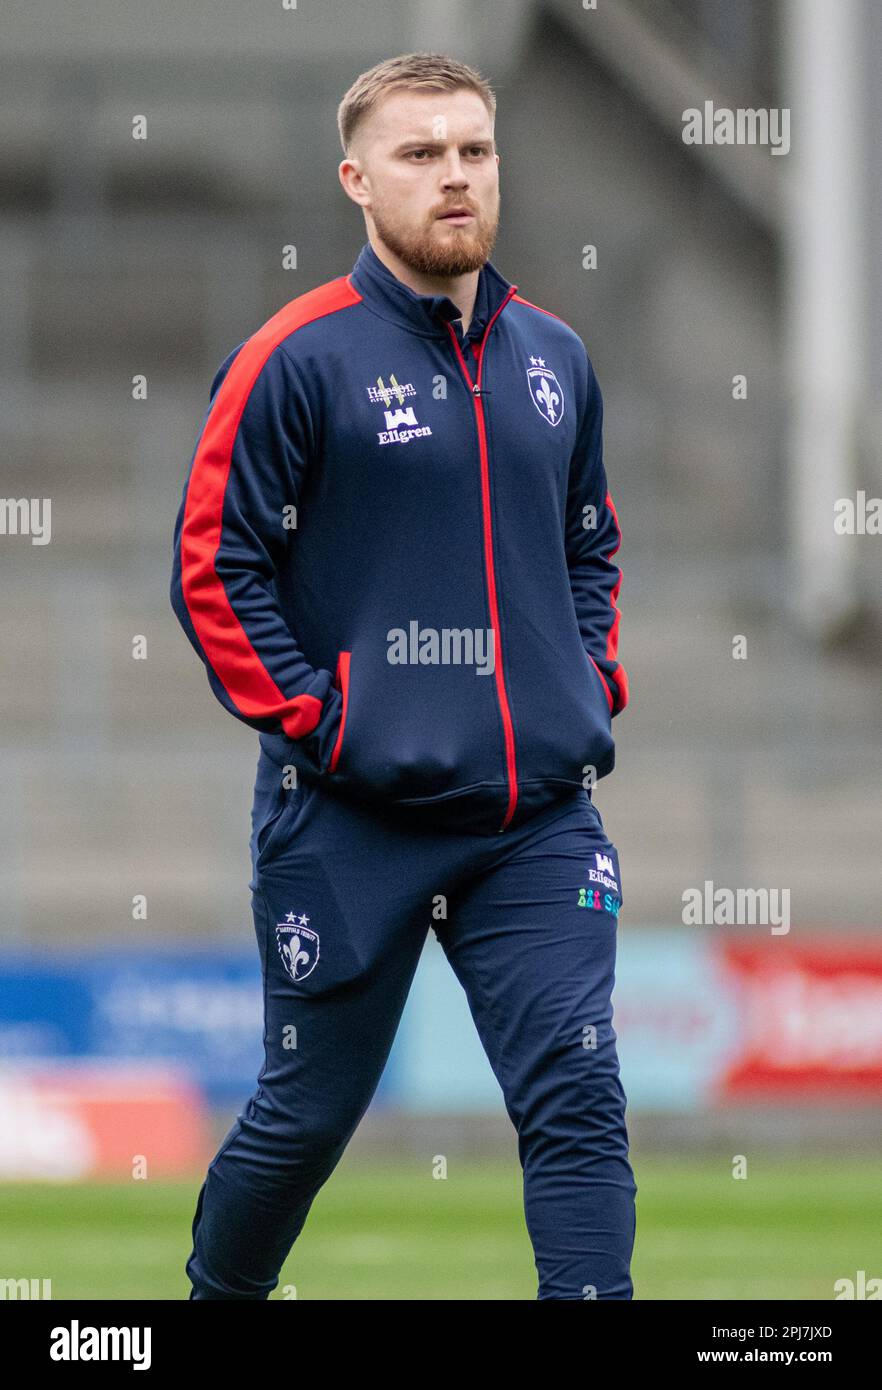 St Helens, Merseyside, England 31st March 2023. Wakefields Morgan Smith arrives to take a look at the pitch during, St Helens Rugby Football Club V Wakefield Trinity Rugby League Football Club at the Totally Wicked Stadium, the Betfred Super League (Credit Image: ©Cody Froggatt/Alamy live news) Stock Photo